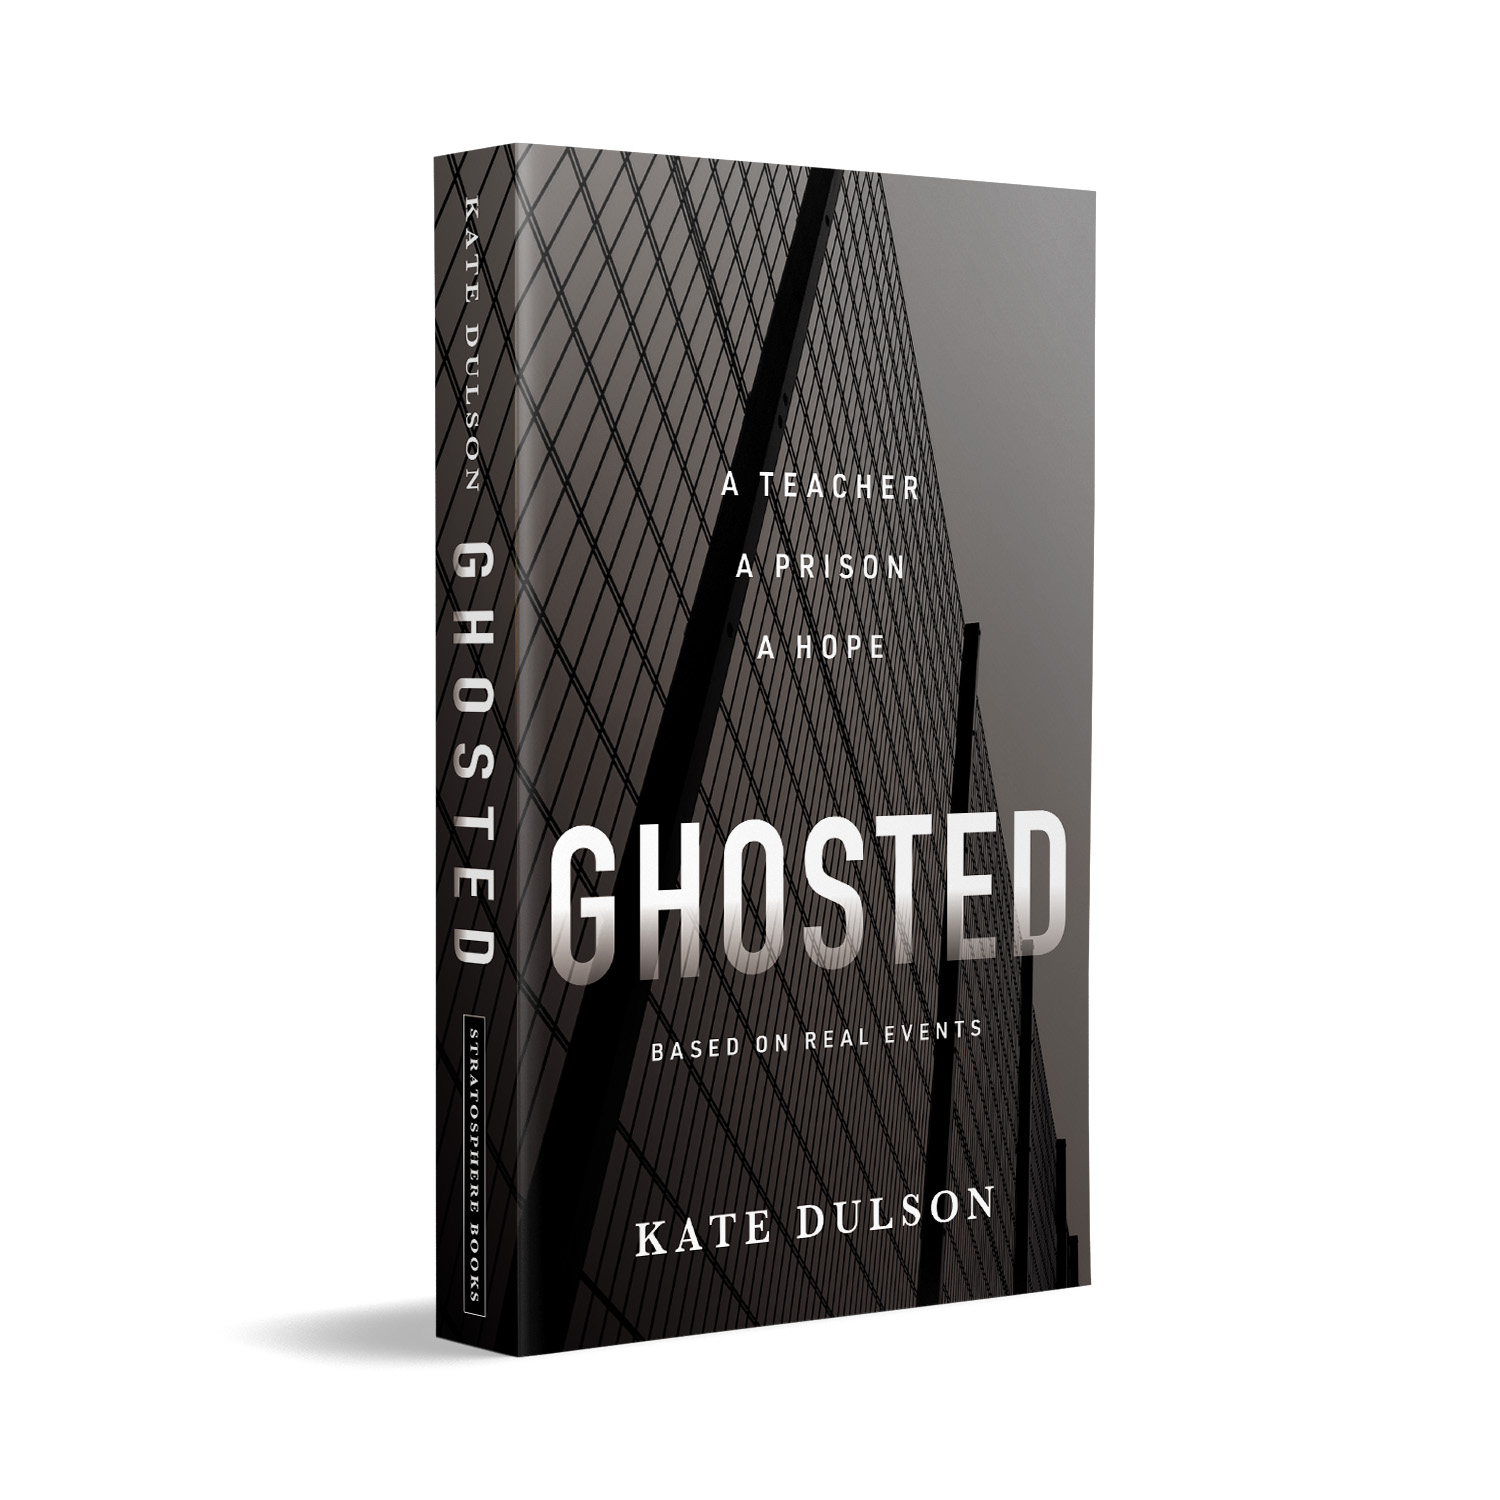 'Ghosted' is a gripping prison-based fiction novel. The author is Kate Dulson. The book cover and interior design are by Mark Thomas. To learn more about what Mark could do for your book, please visit coverness.com.